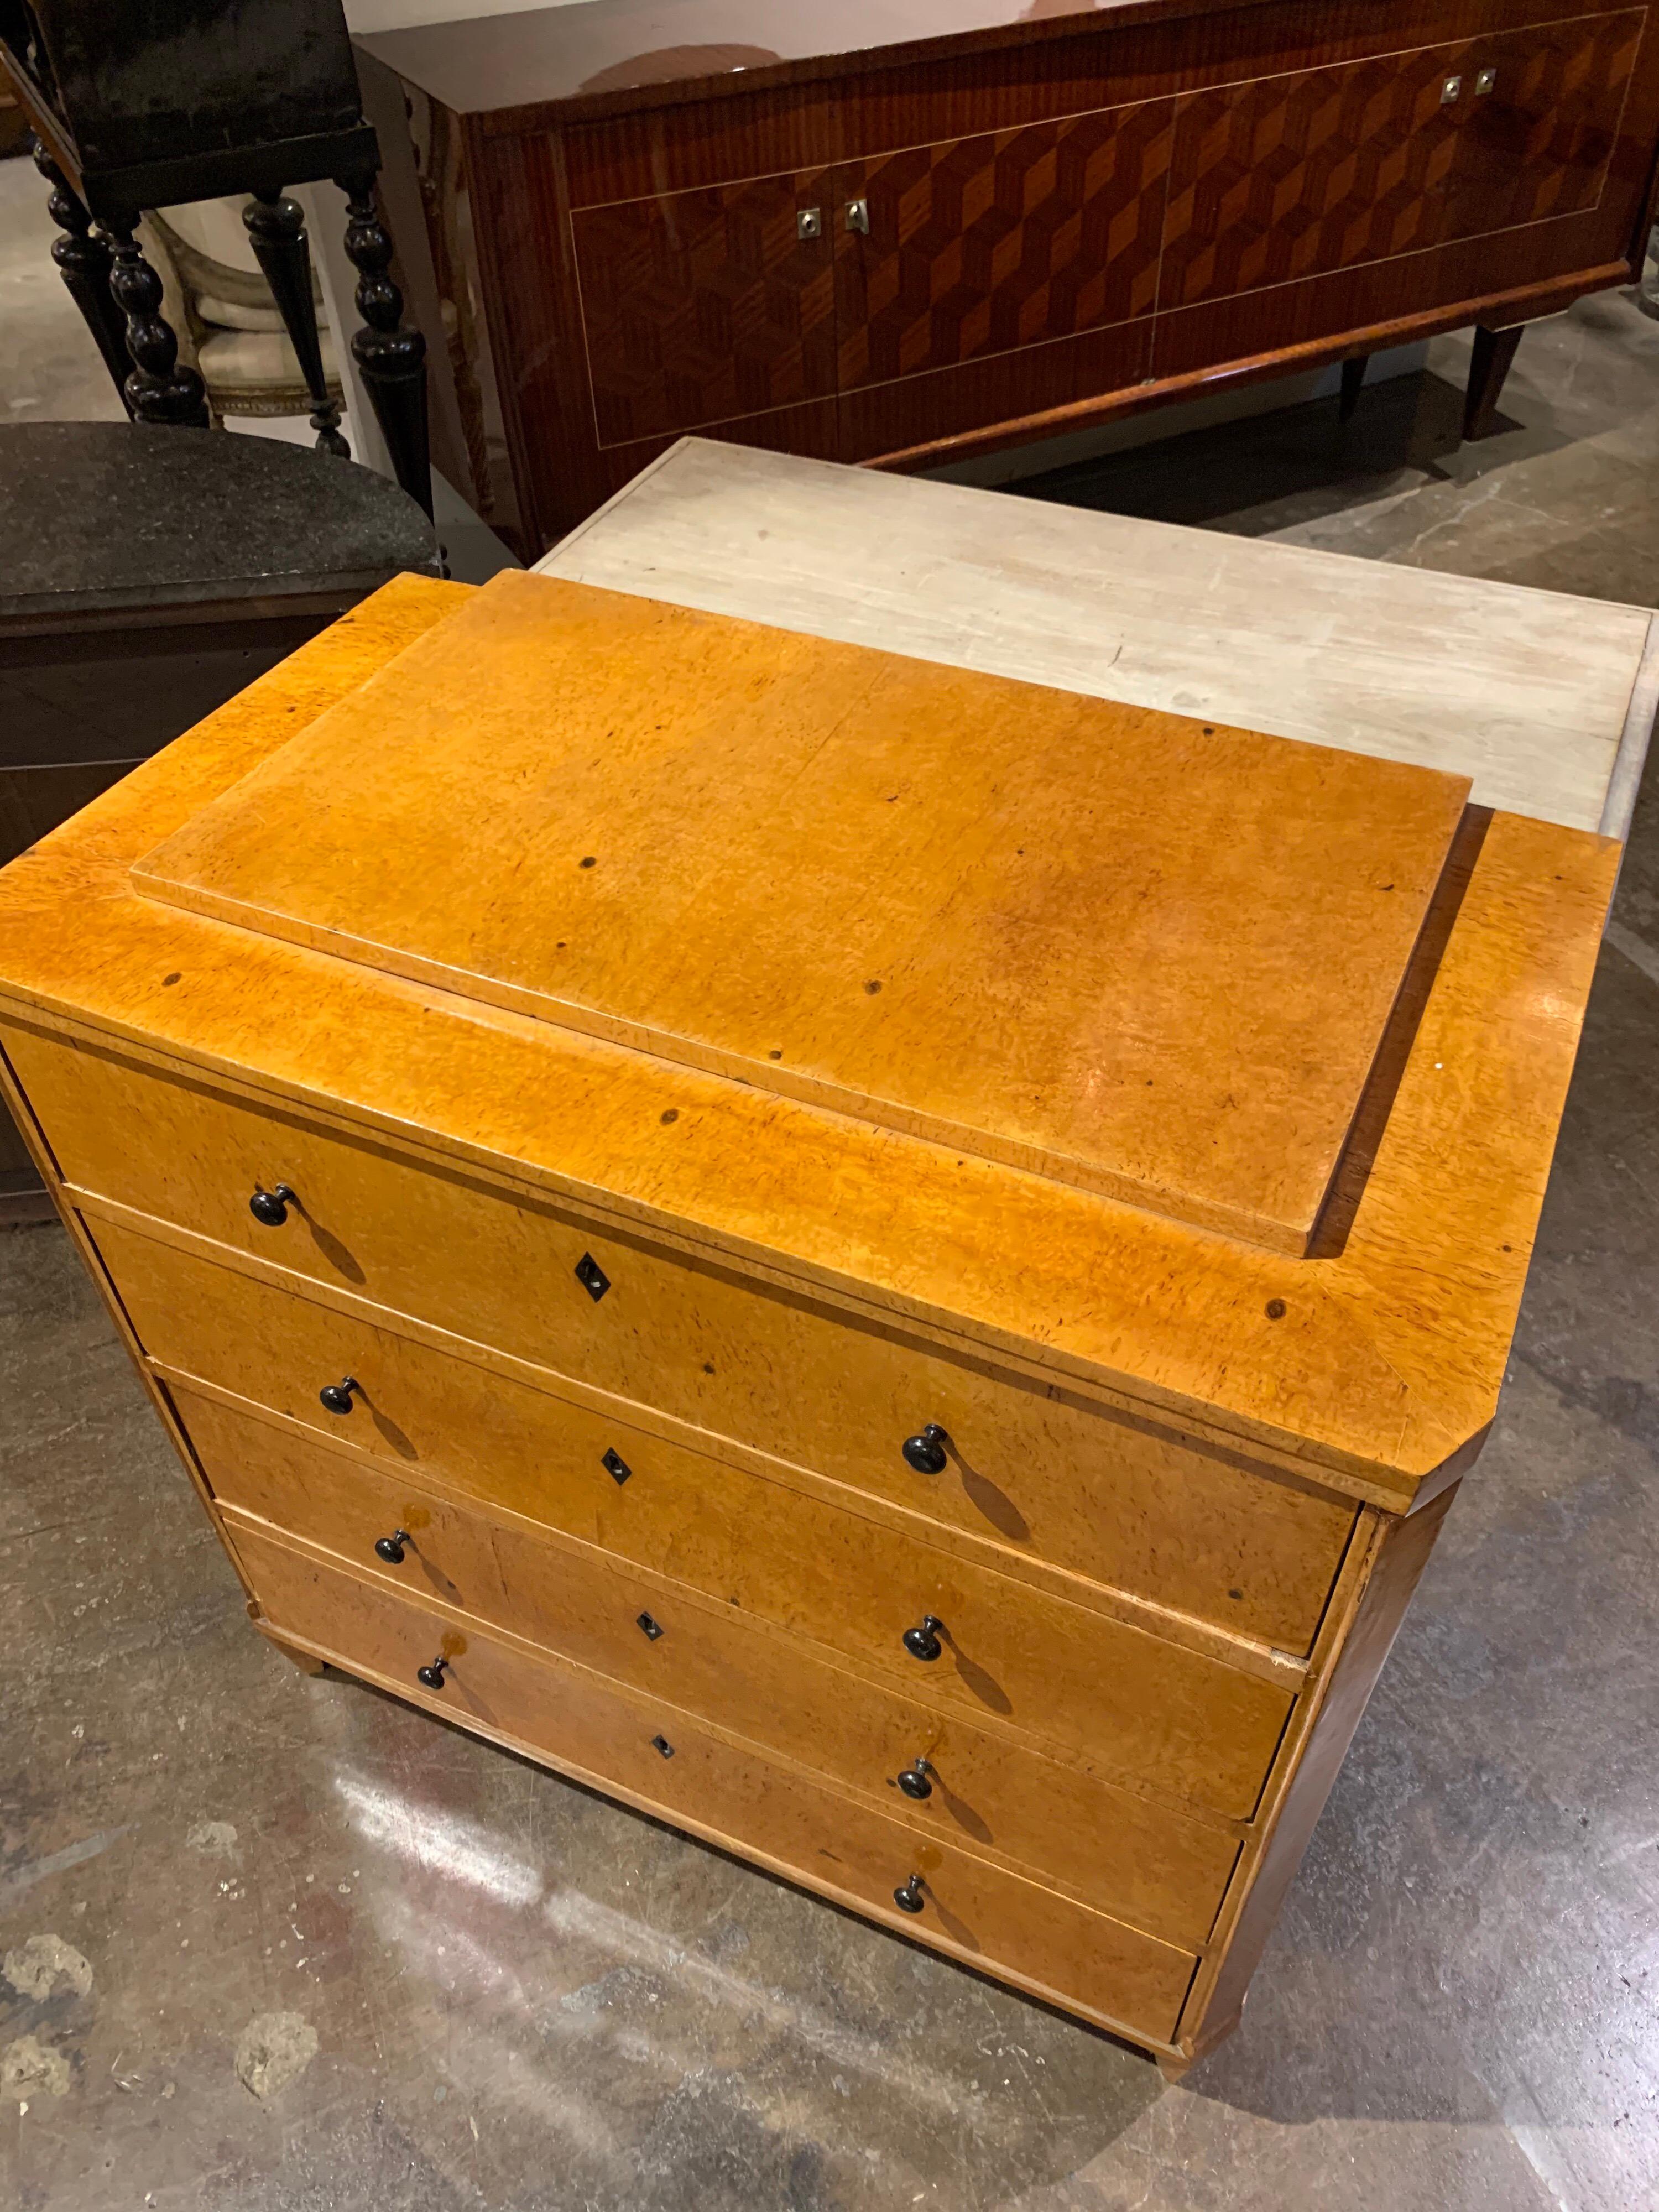 Very handsome German Biedermeier style burl wood chest of drawers with ebony knobs. Lovely Classic sophisticated style makes this a beautiful design element. A quality piece with an amazing finish!